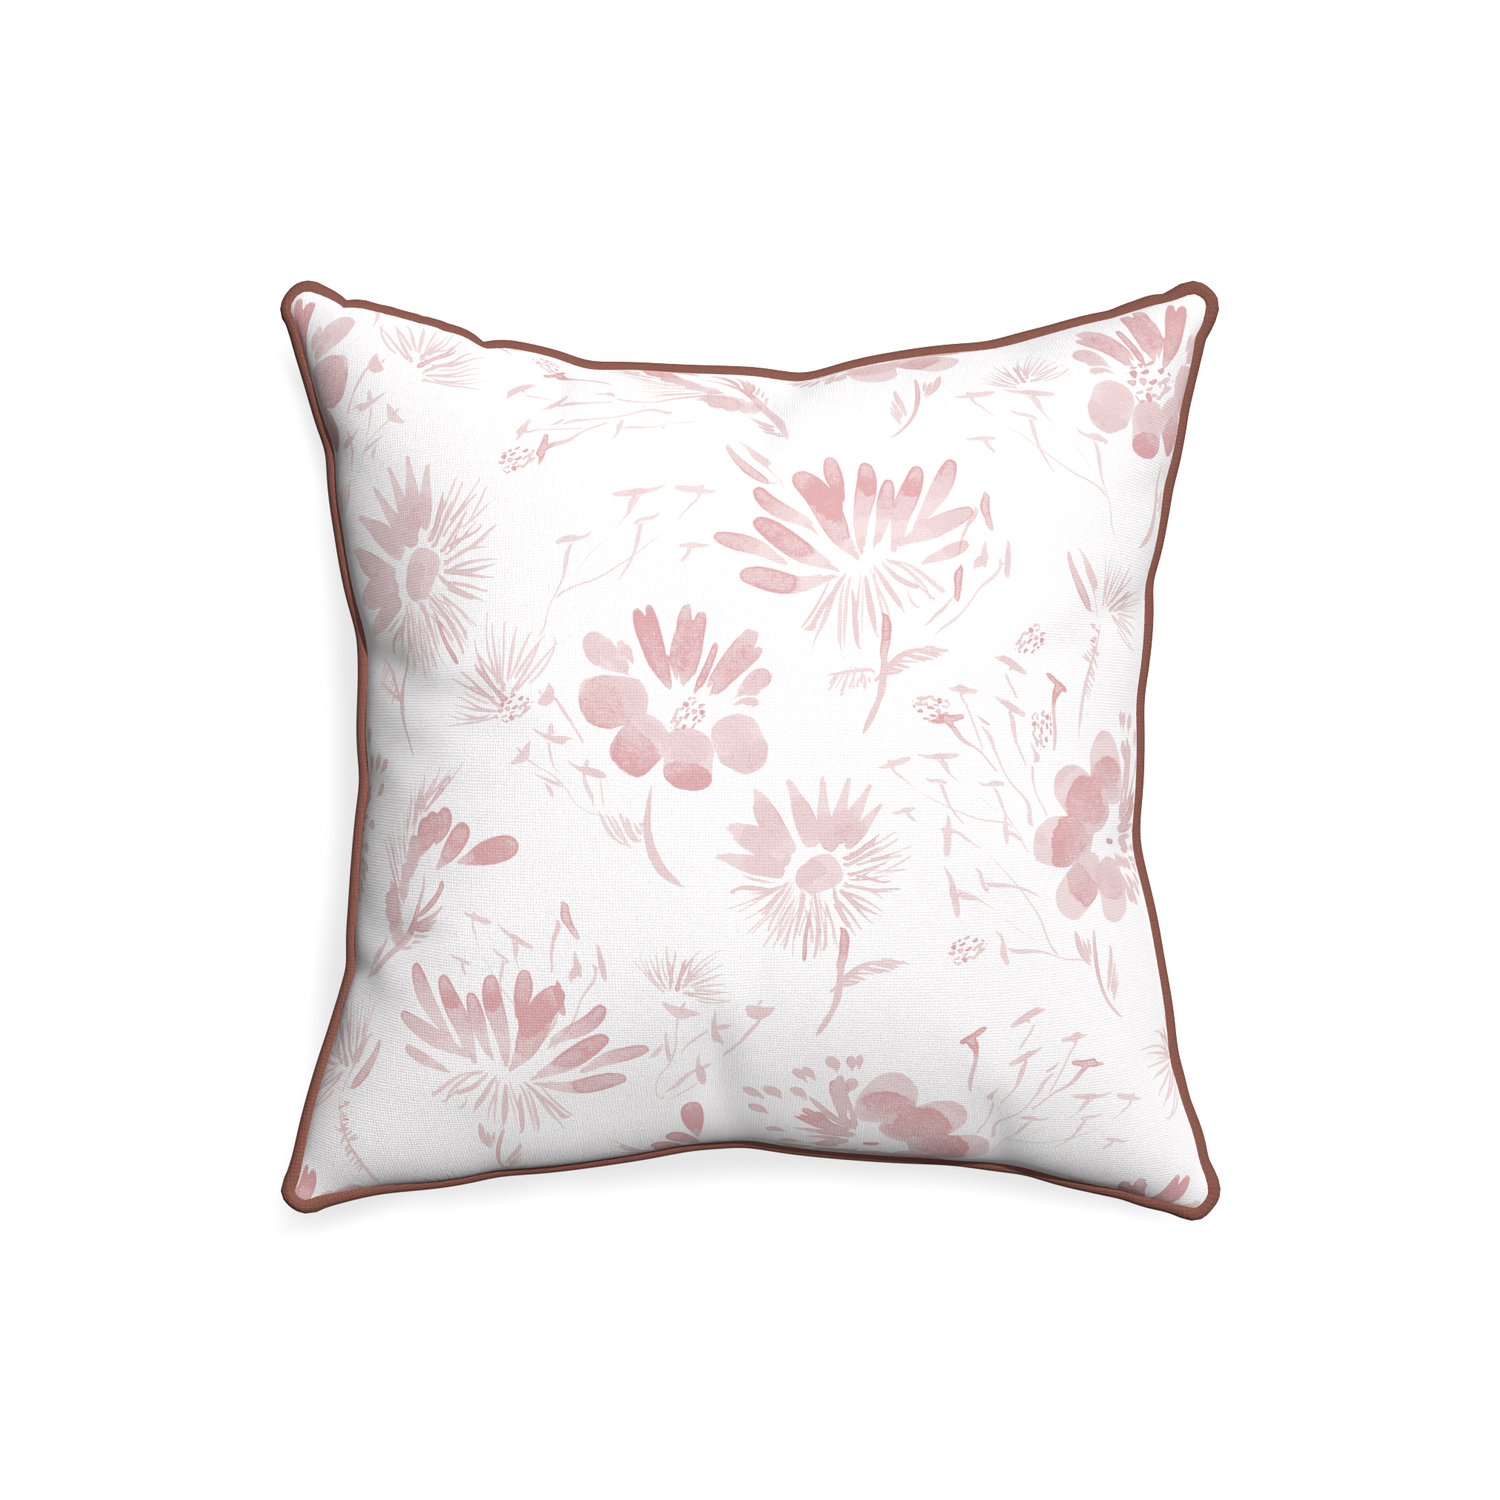 20-square blake custom pink floralpillow with w piping on white background